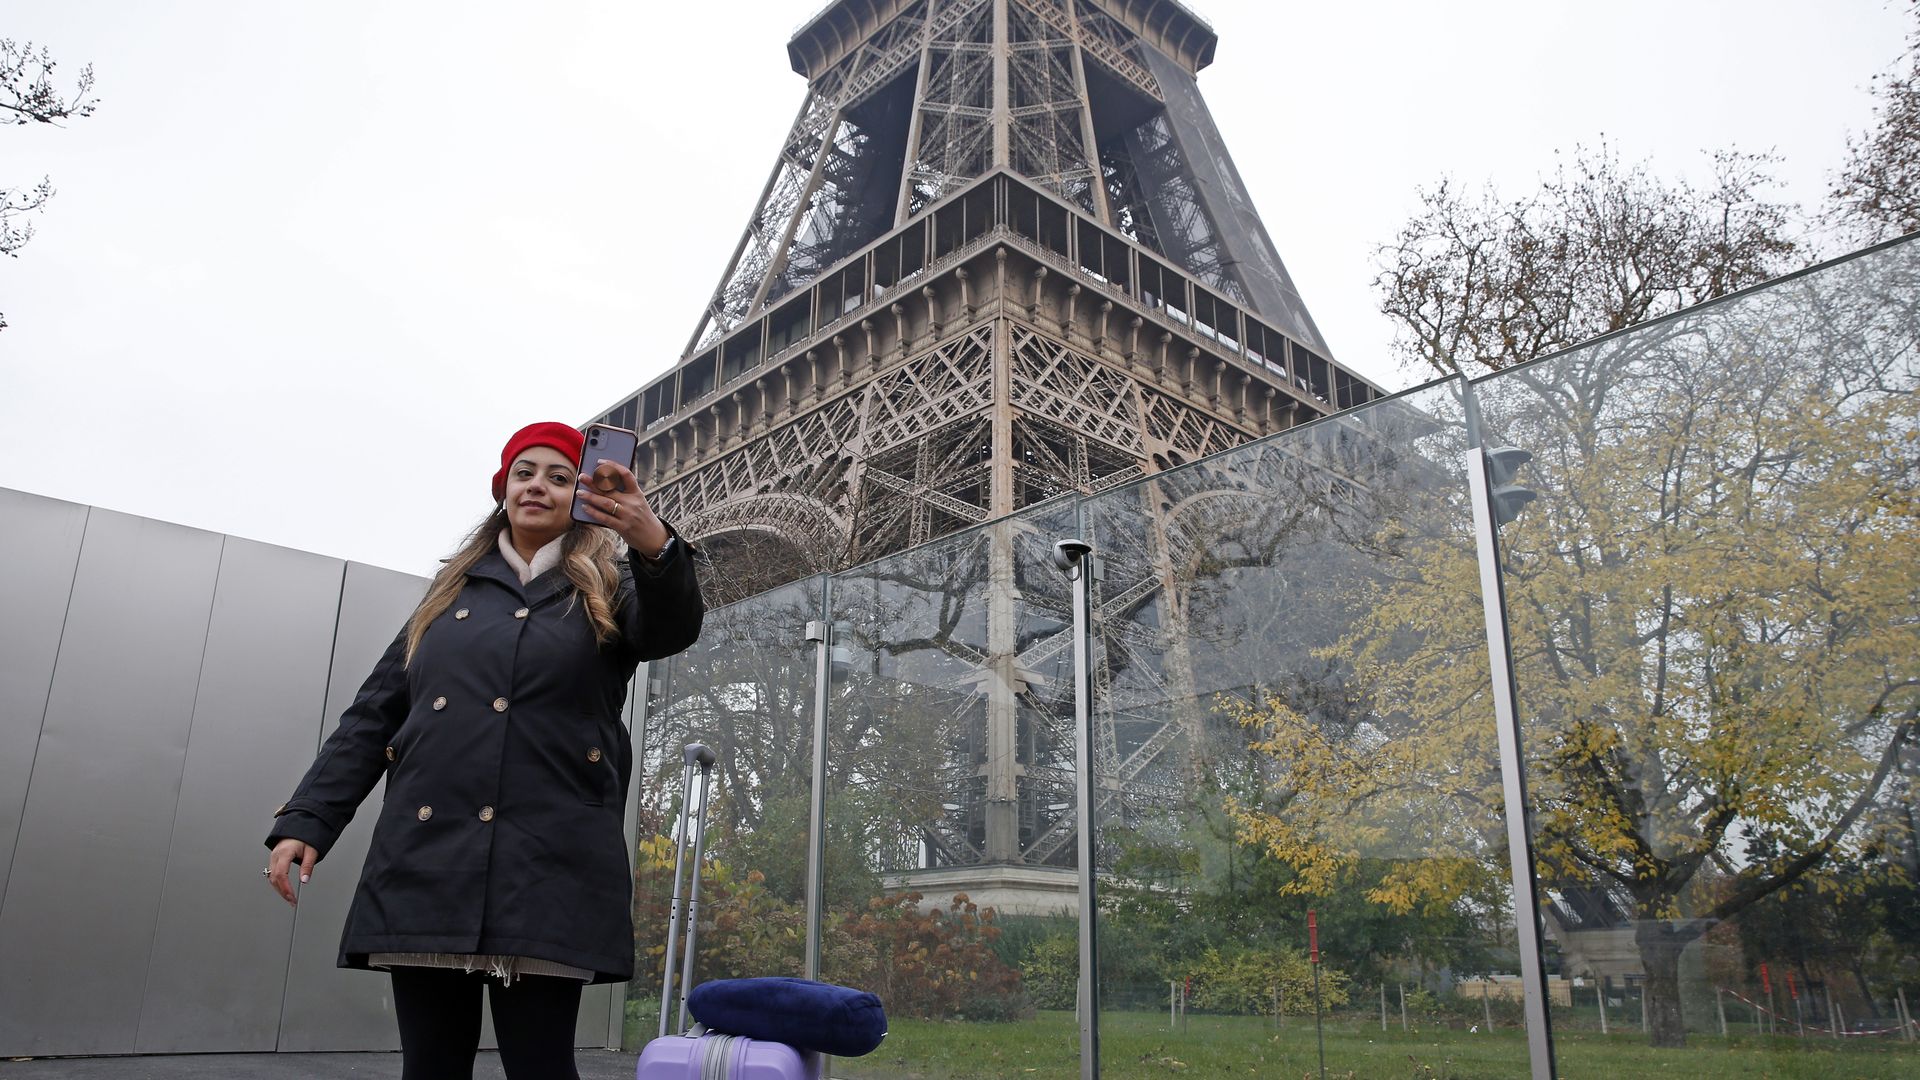 Woman with suitcase takes selfie in front of Eiffel tower.